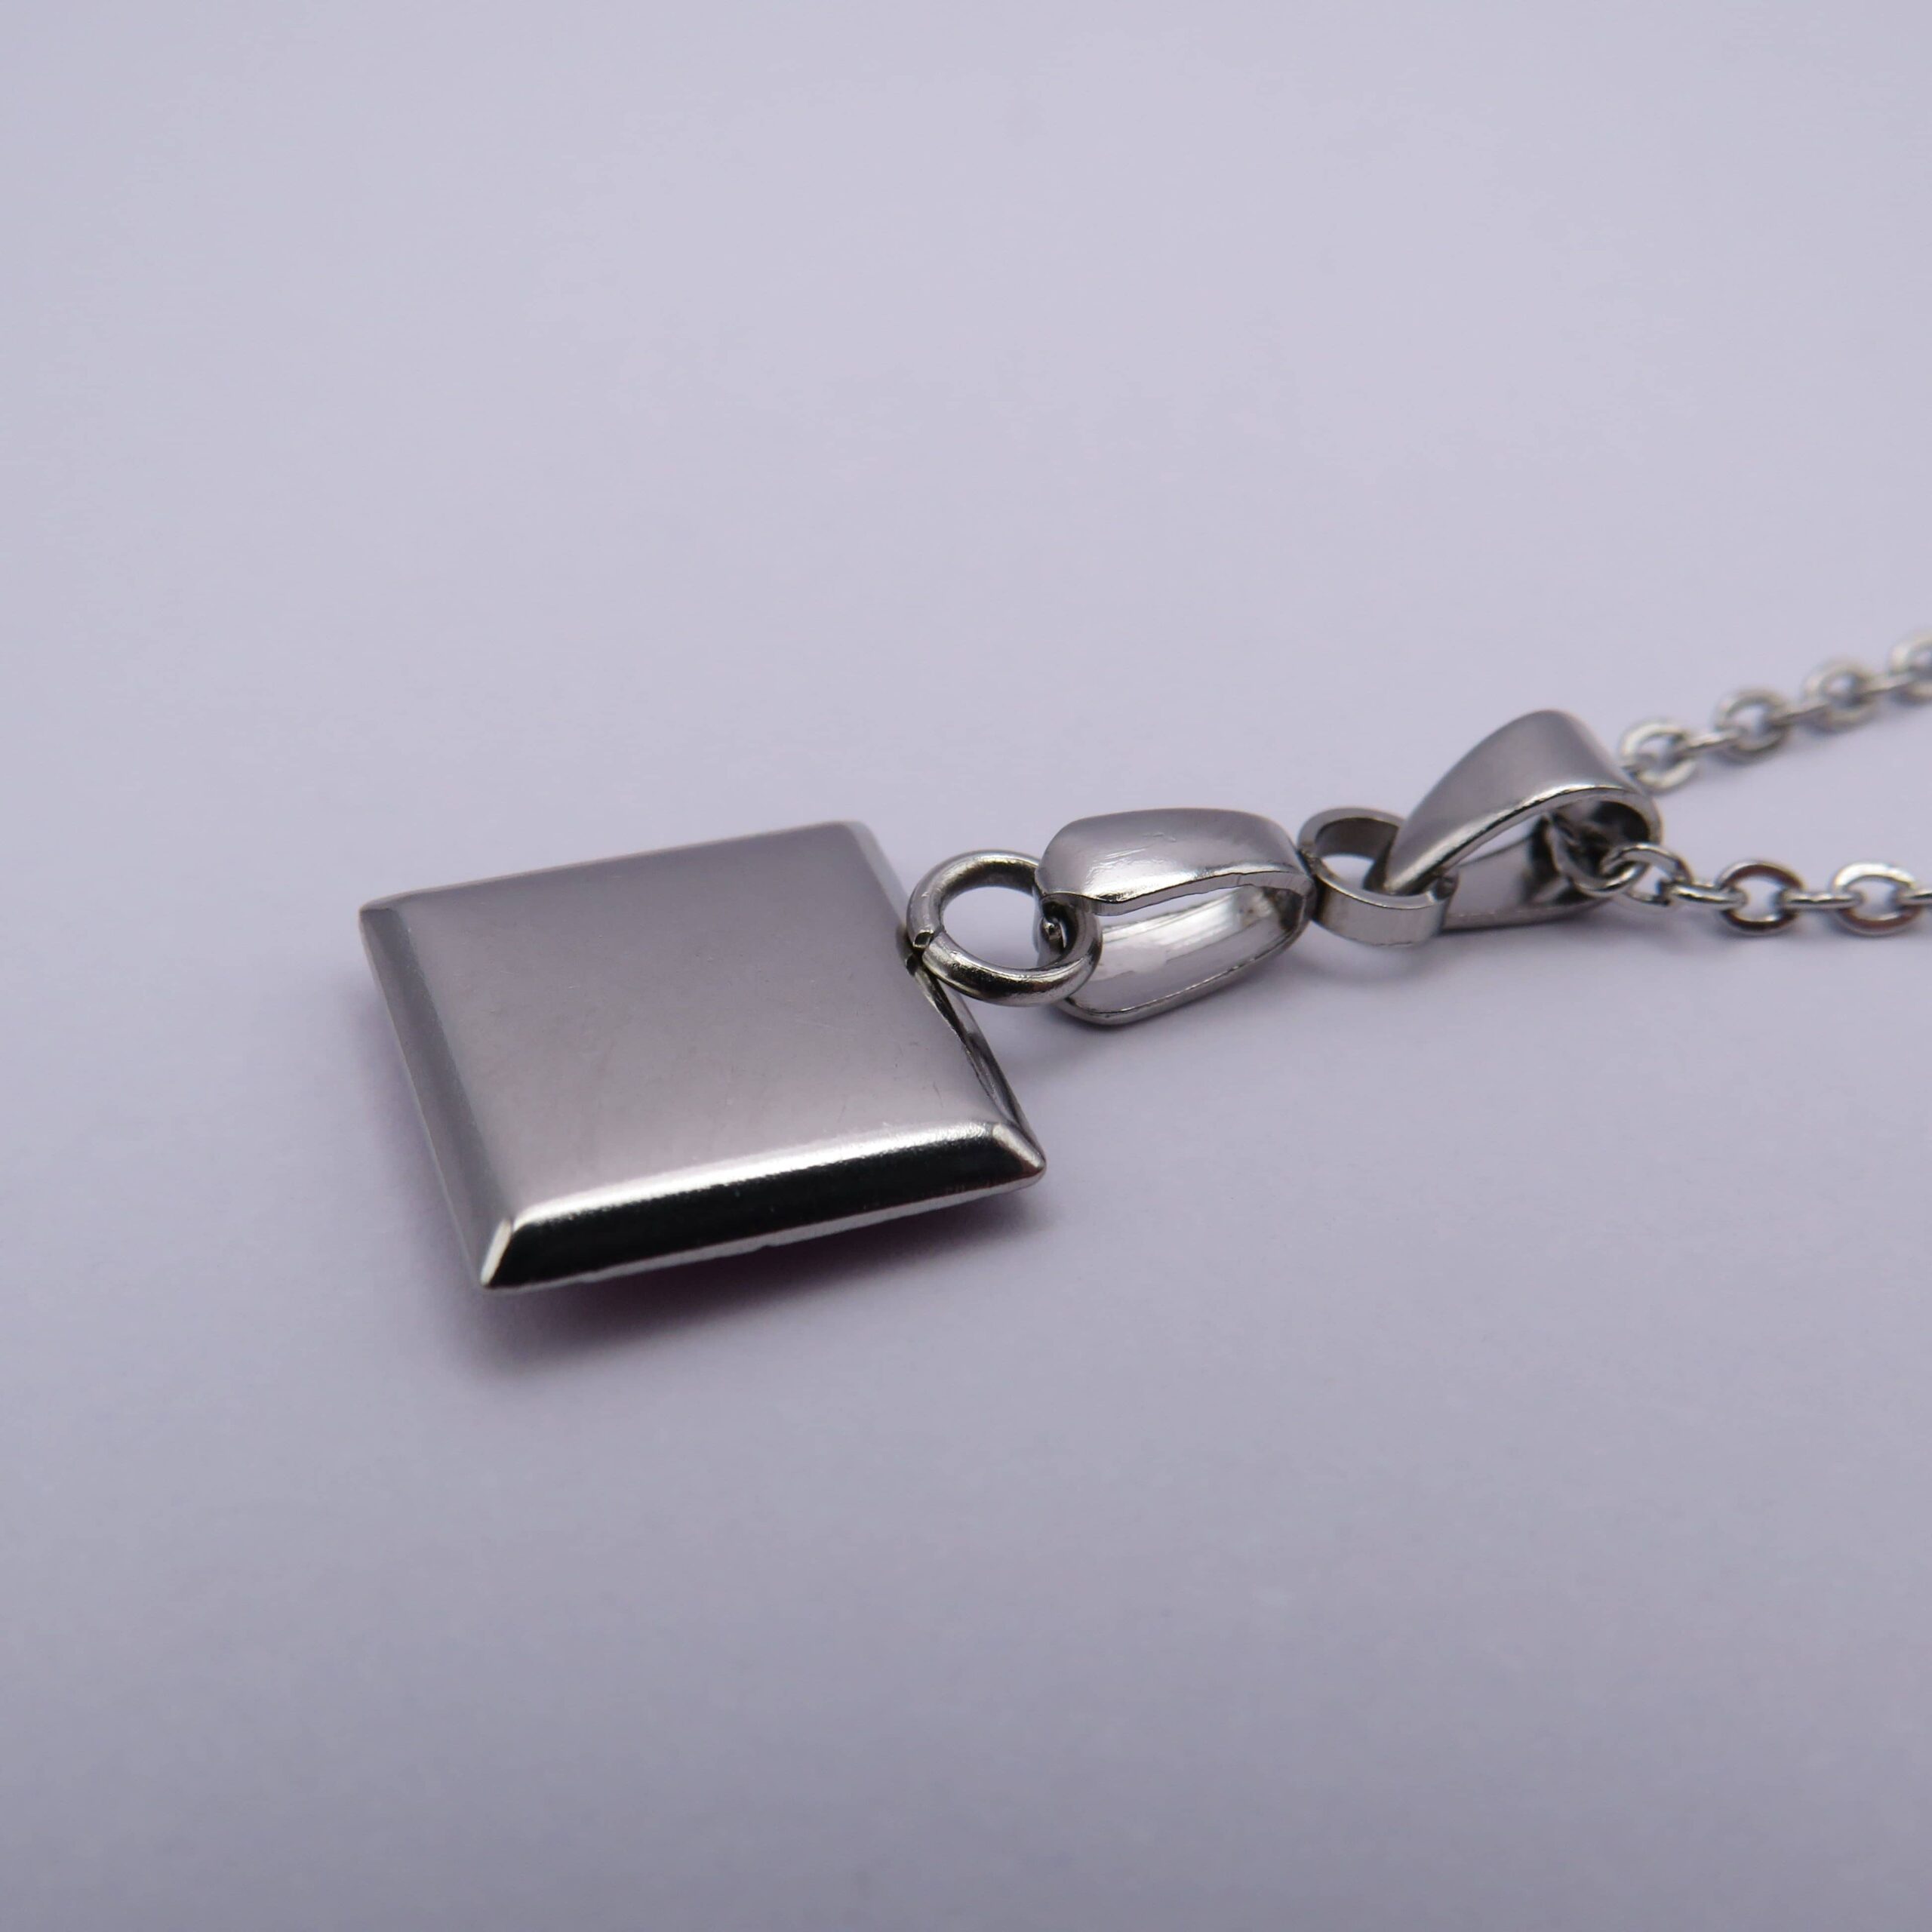 Stainless Steel Pink Square Cabochon Pendant Necklace